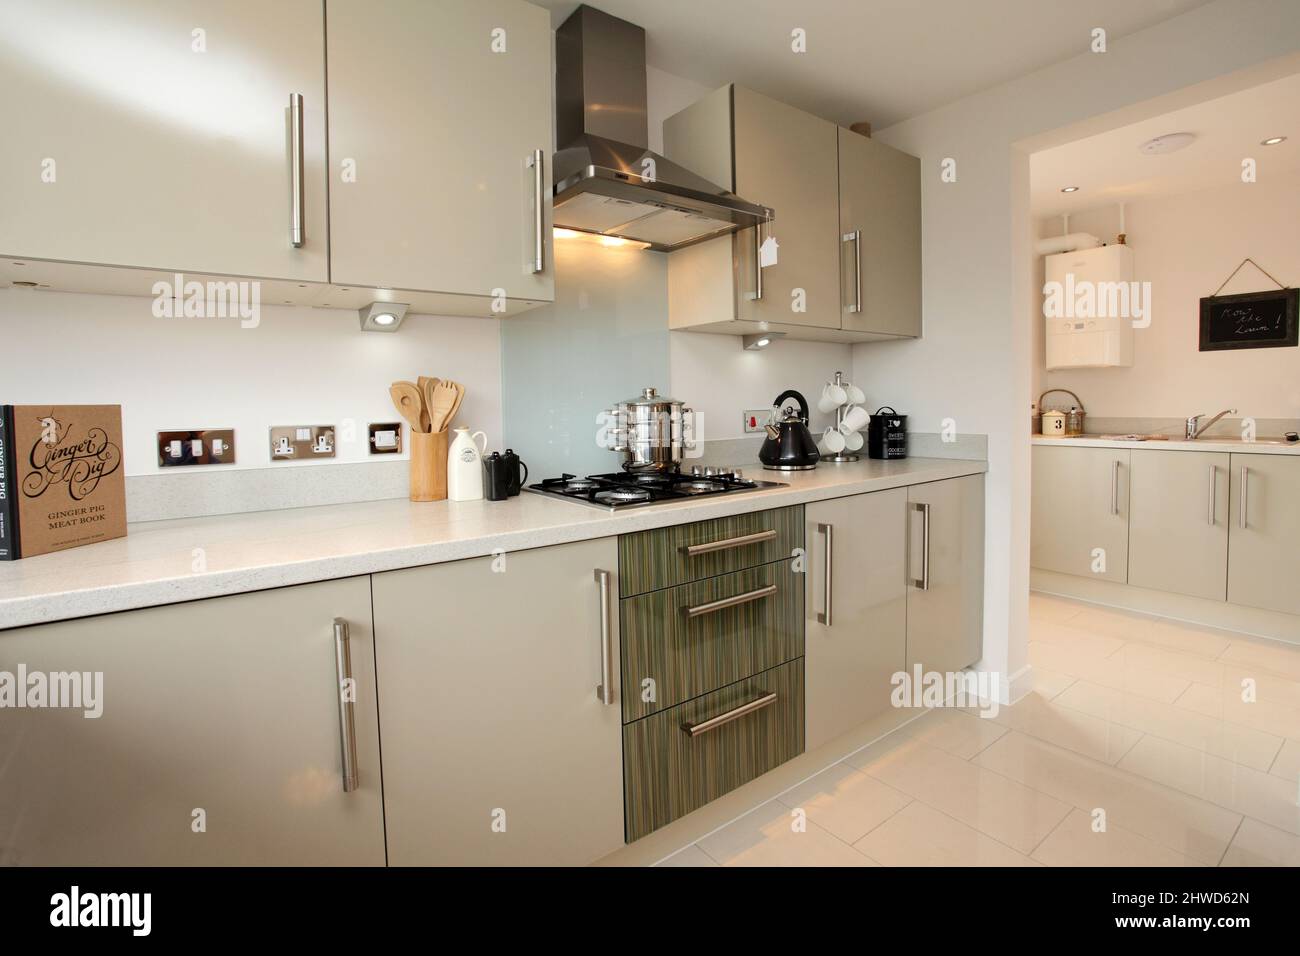 Kitchen in modern showhome, fitted kitchen units, floor and wall cupboards, through to laundry utility room Stock Photo